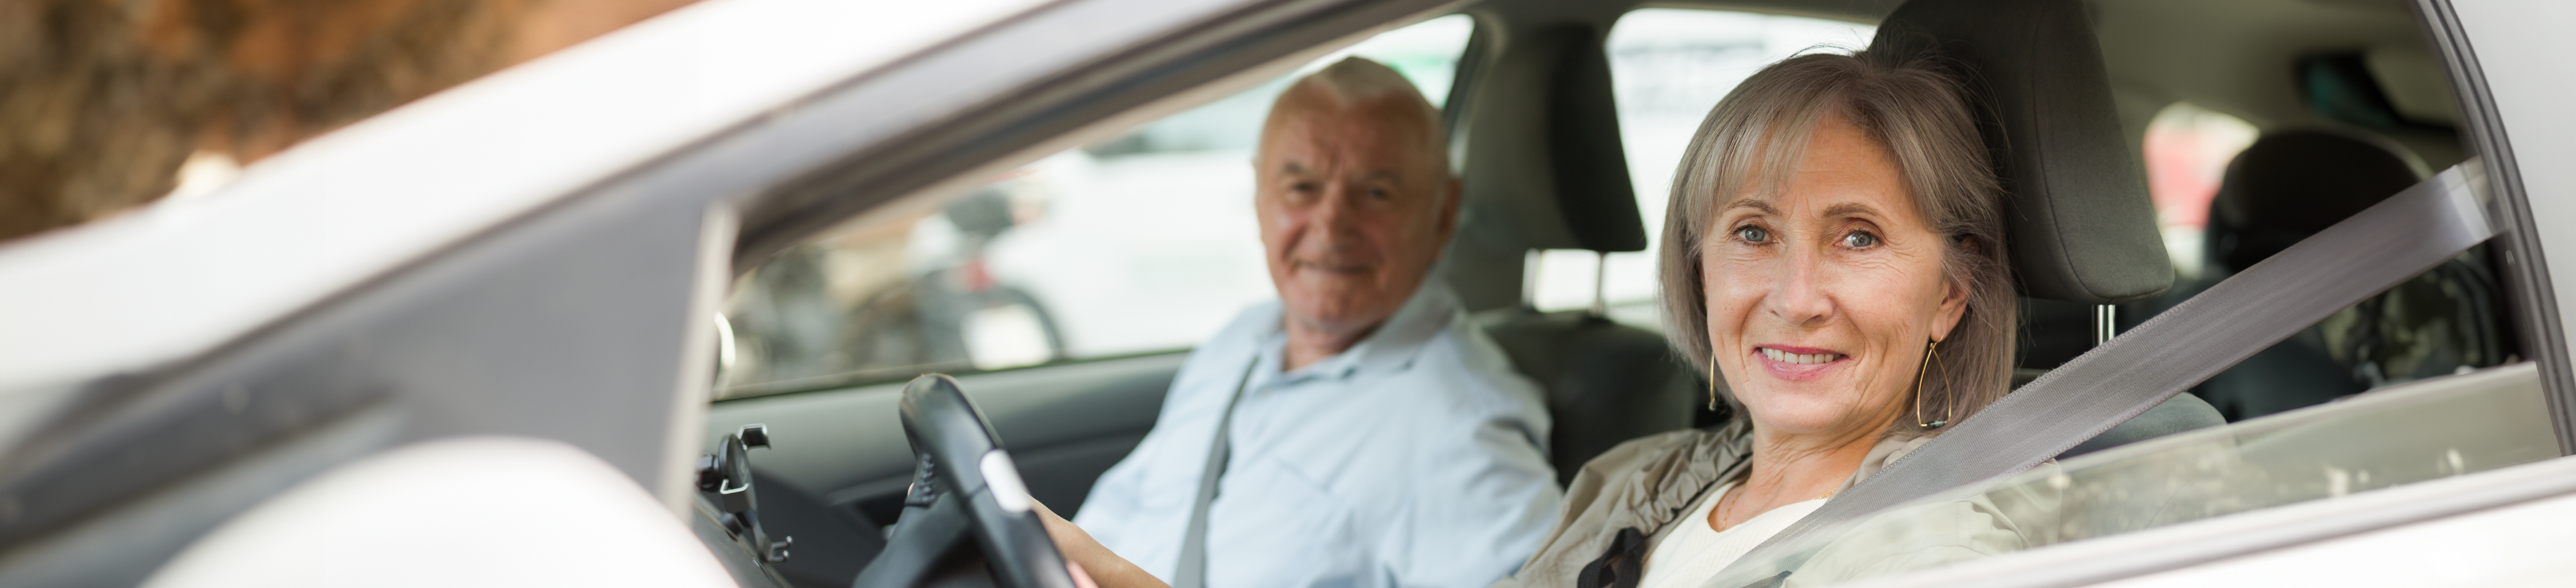 image of older woman driving a car with her seatbelt on with a male passenger